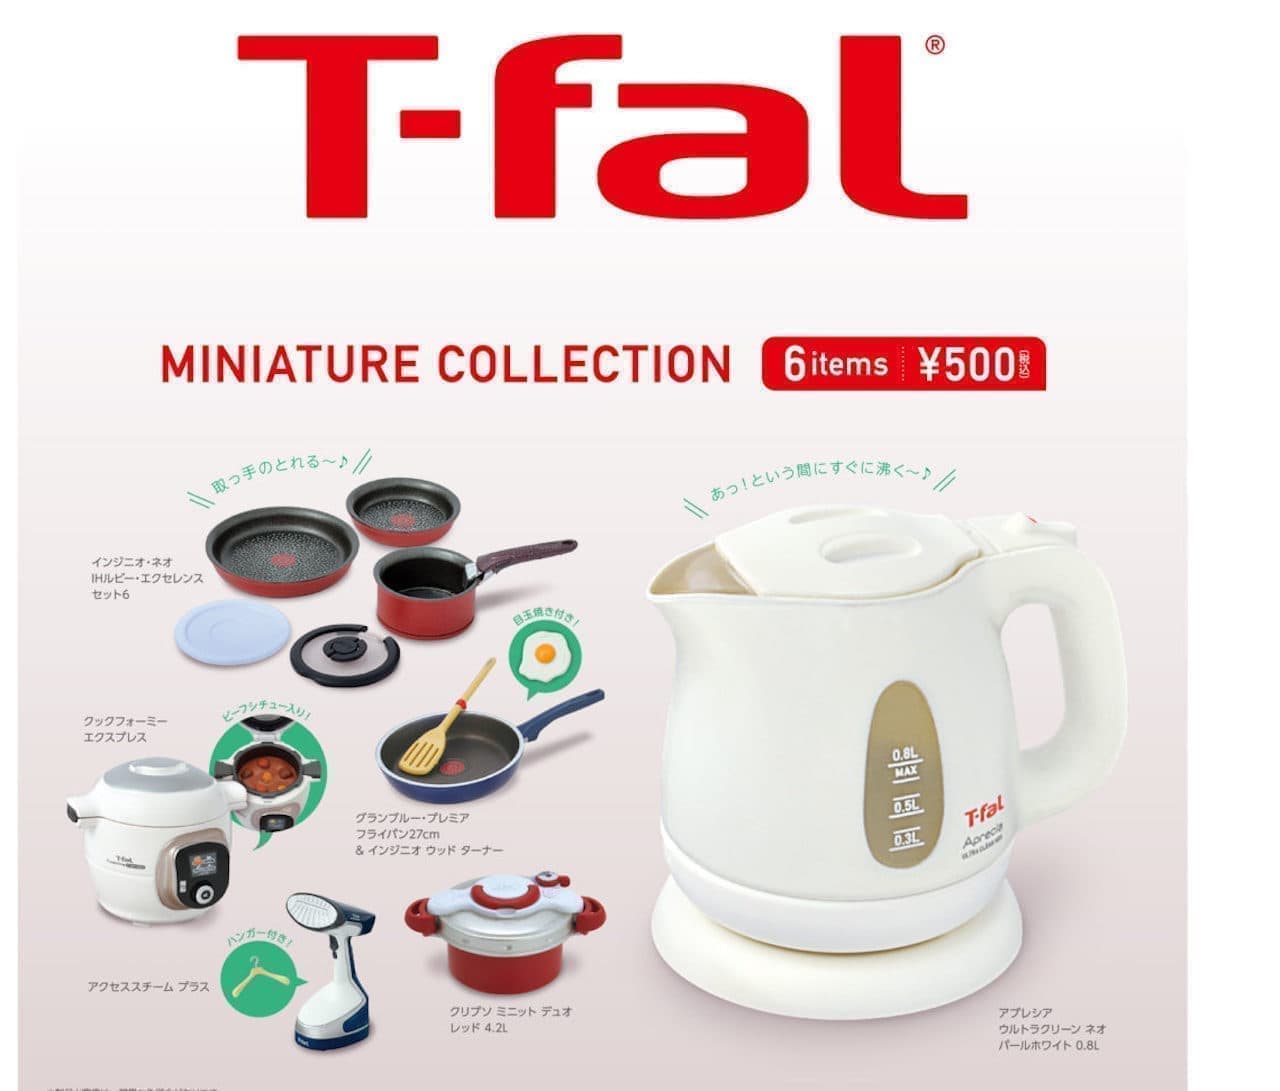 Capsule toy "T-fal miniature collection"